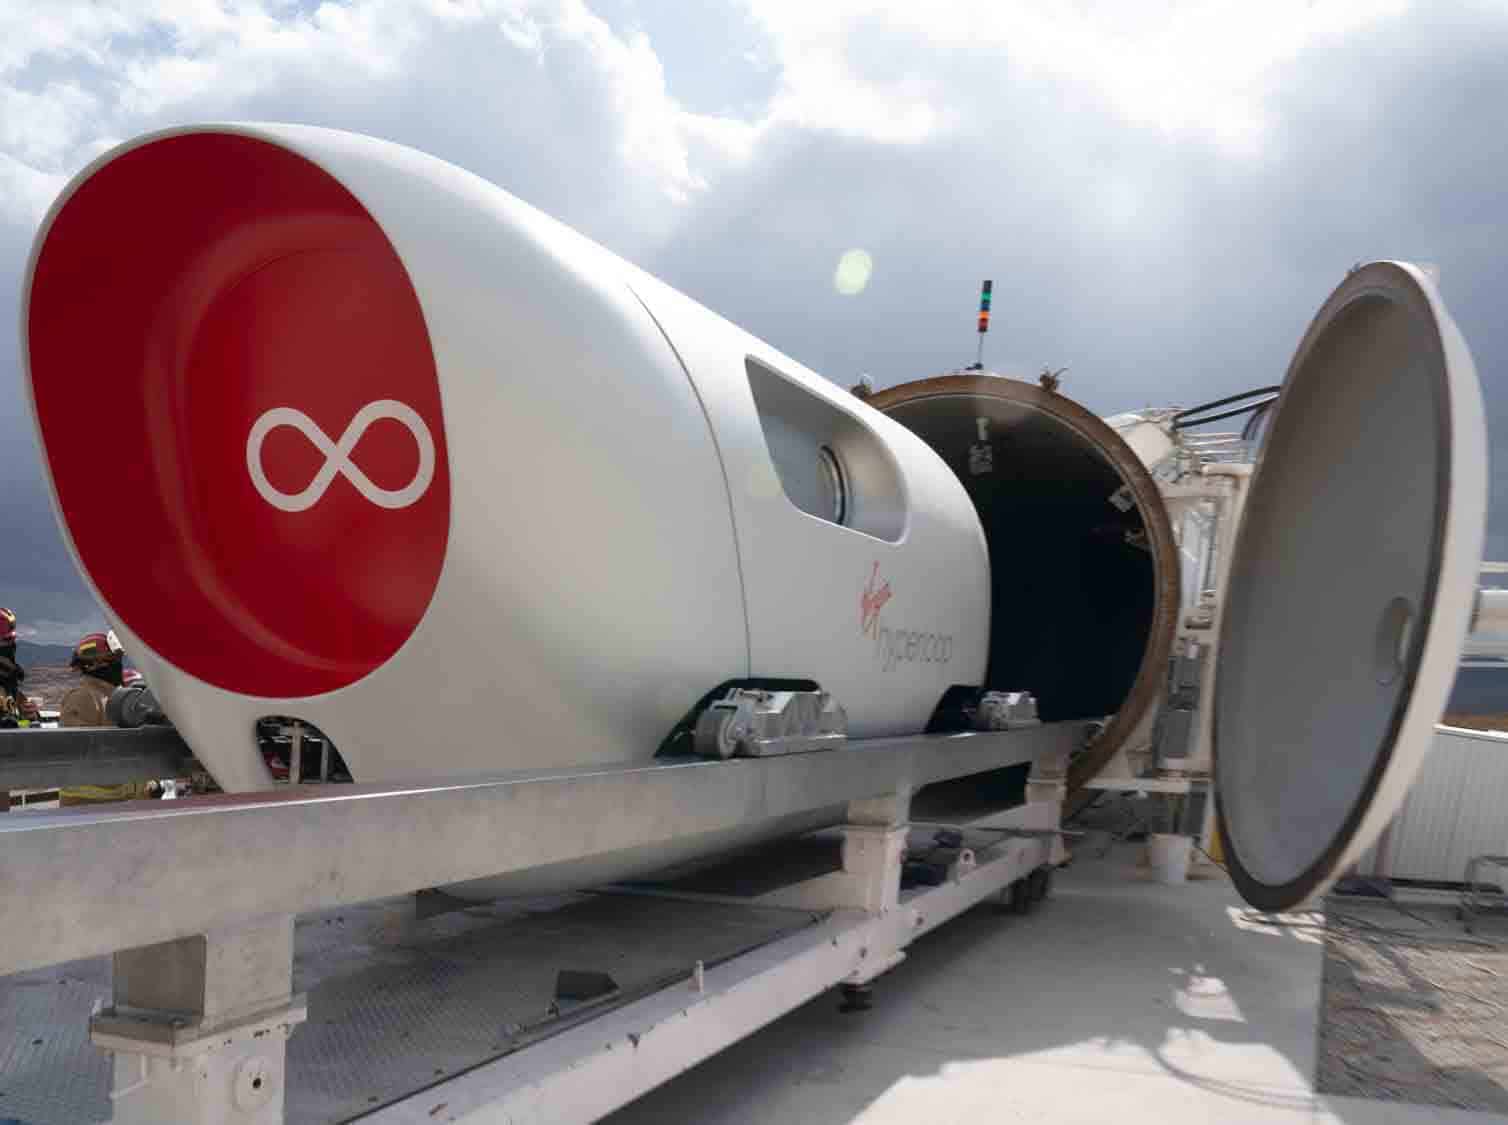 By combining an ultra-efficient electric motor, magnetic levitation, and a low-drag environment, hyperloop systems can carry more people than a subway, at airline speeds, and with zero direct emissions.